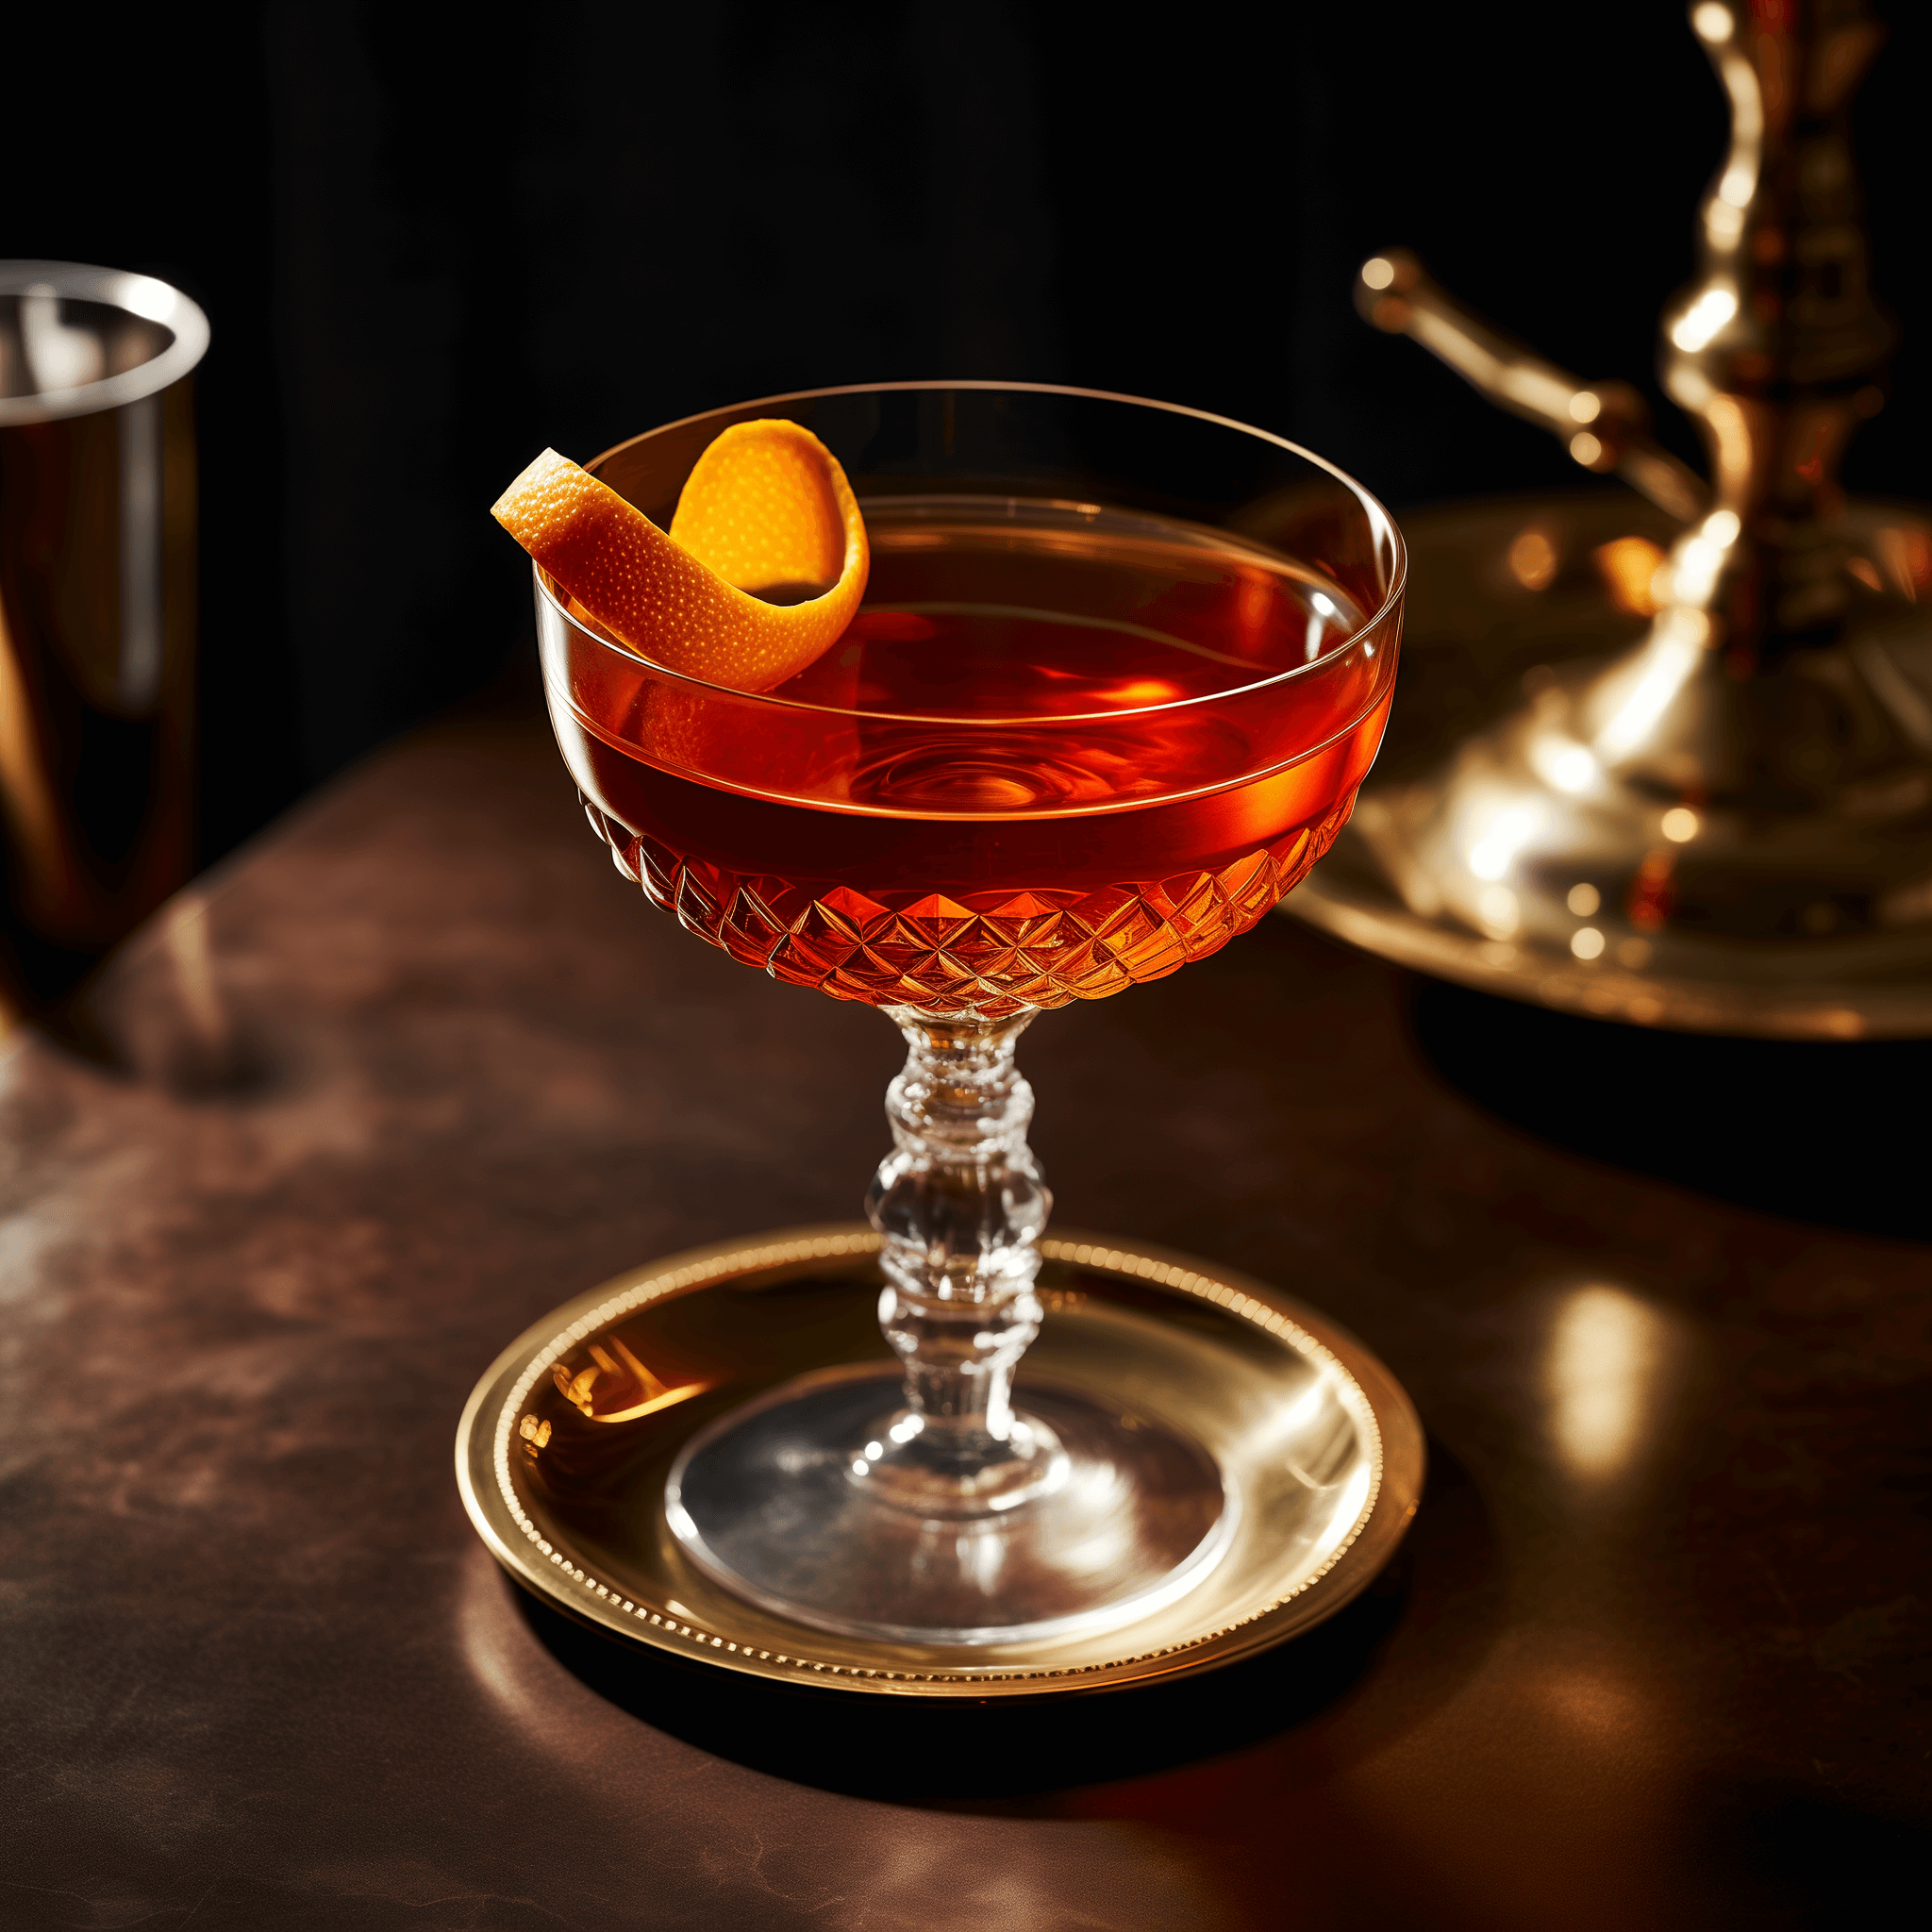 Aperol Manhattan Cocktail Recipe - The Aperol Manhattan is a harmonious blend of sweet and bitter, with the Aperol providing a unique orange and rhubarb flavor that complements the robustness of the whiskey. The sweet vermouth balances the bitterness, while the bitters add depth. Overall, it's a complex, medium-strong cocktail with a smooth finish.